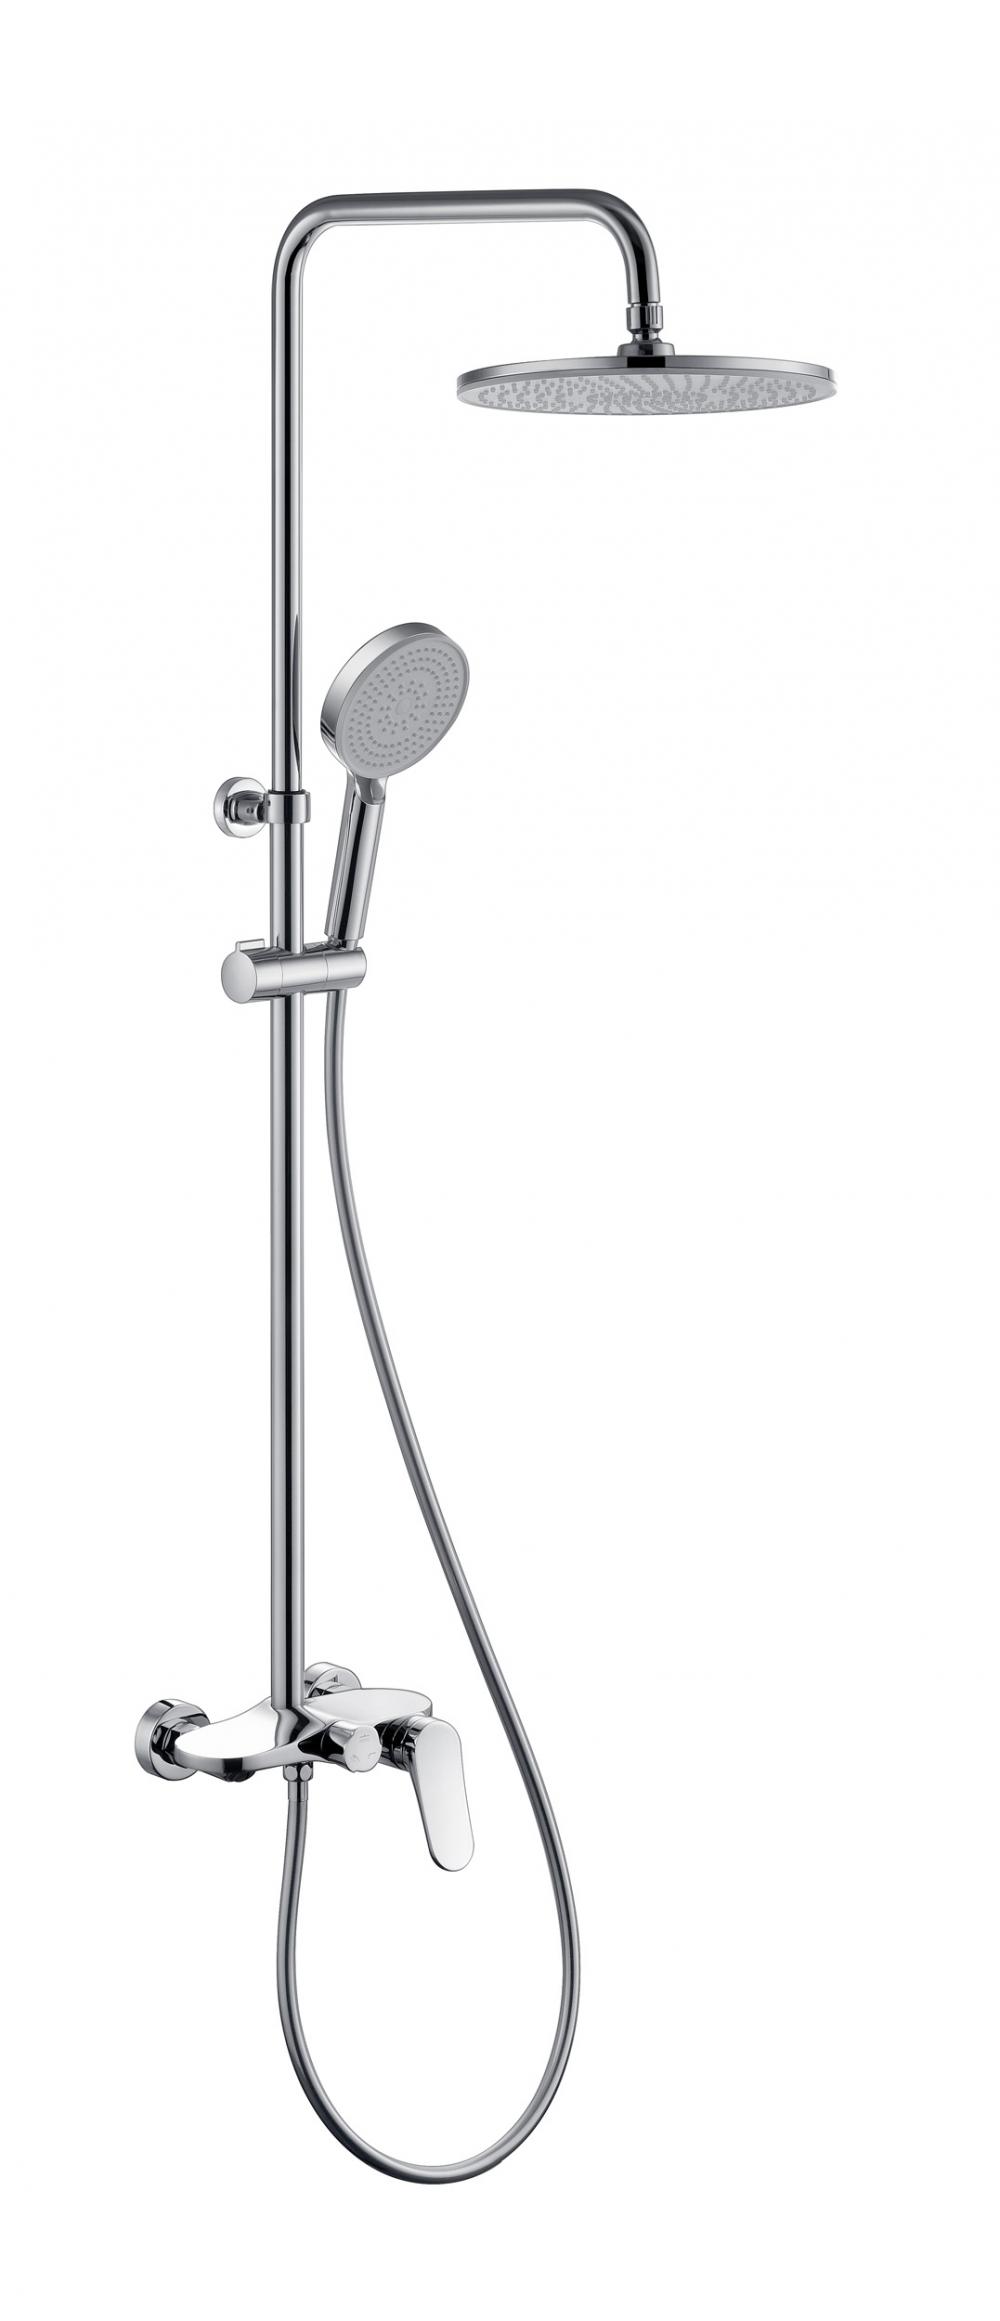 Wall Mounted Chromed Single Handle Shower Mixer Faucet